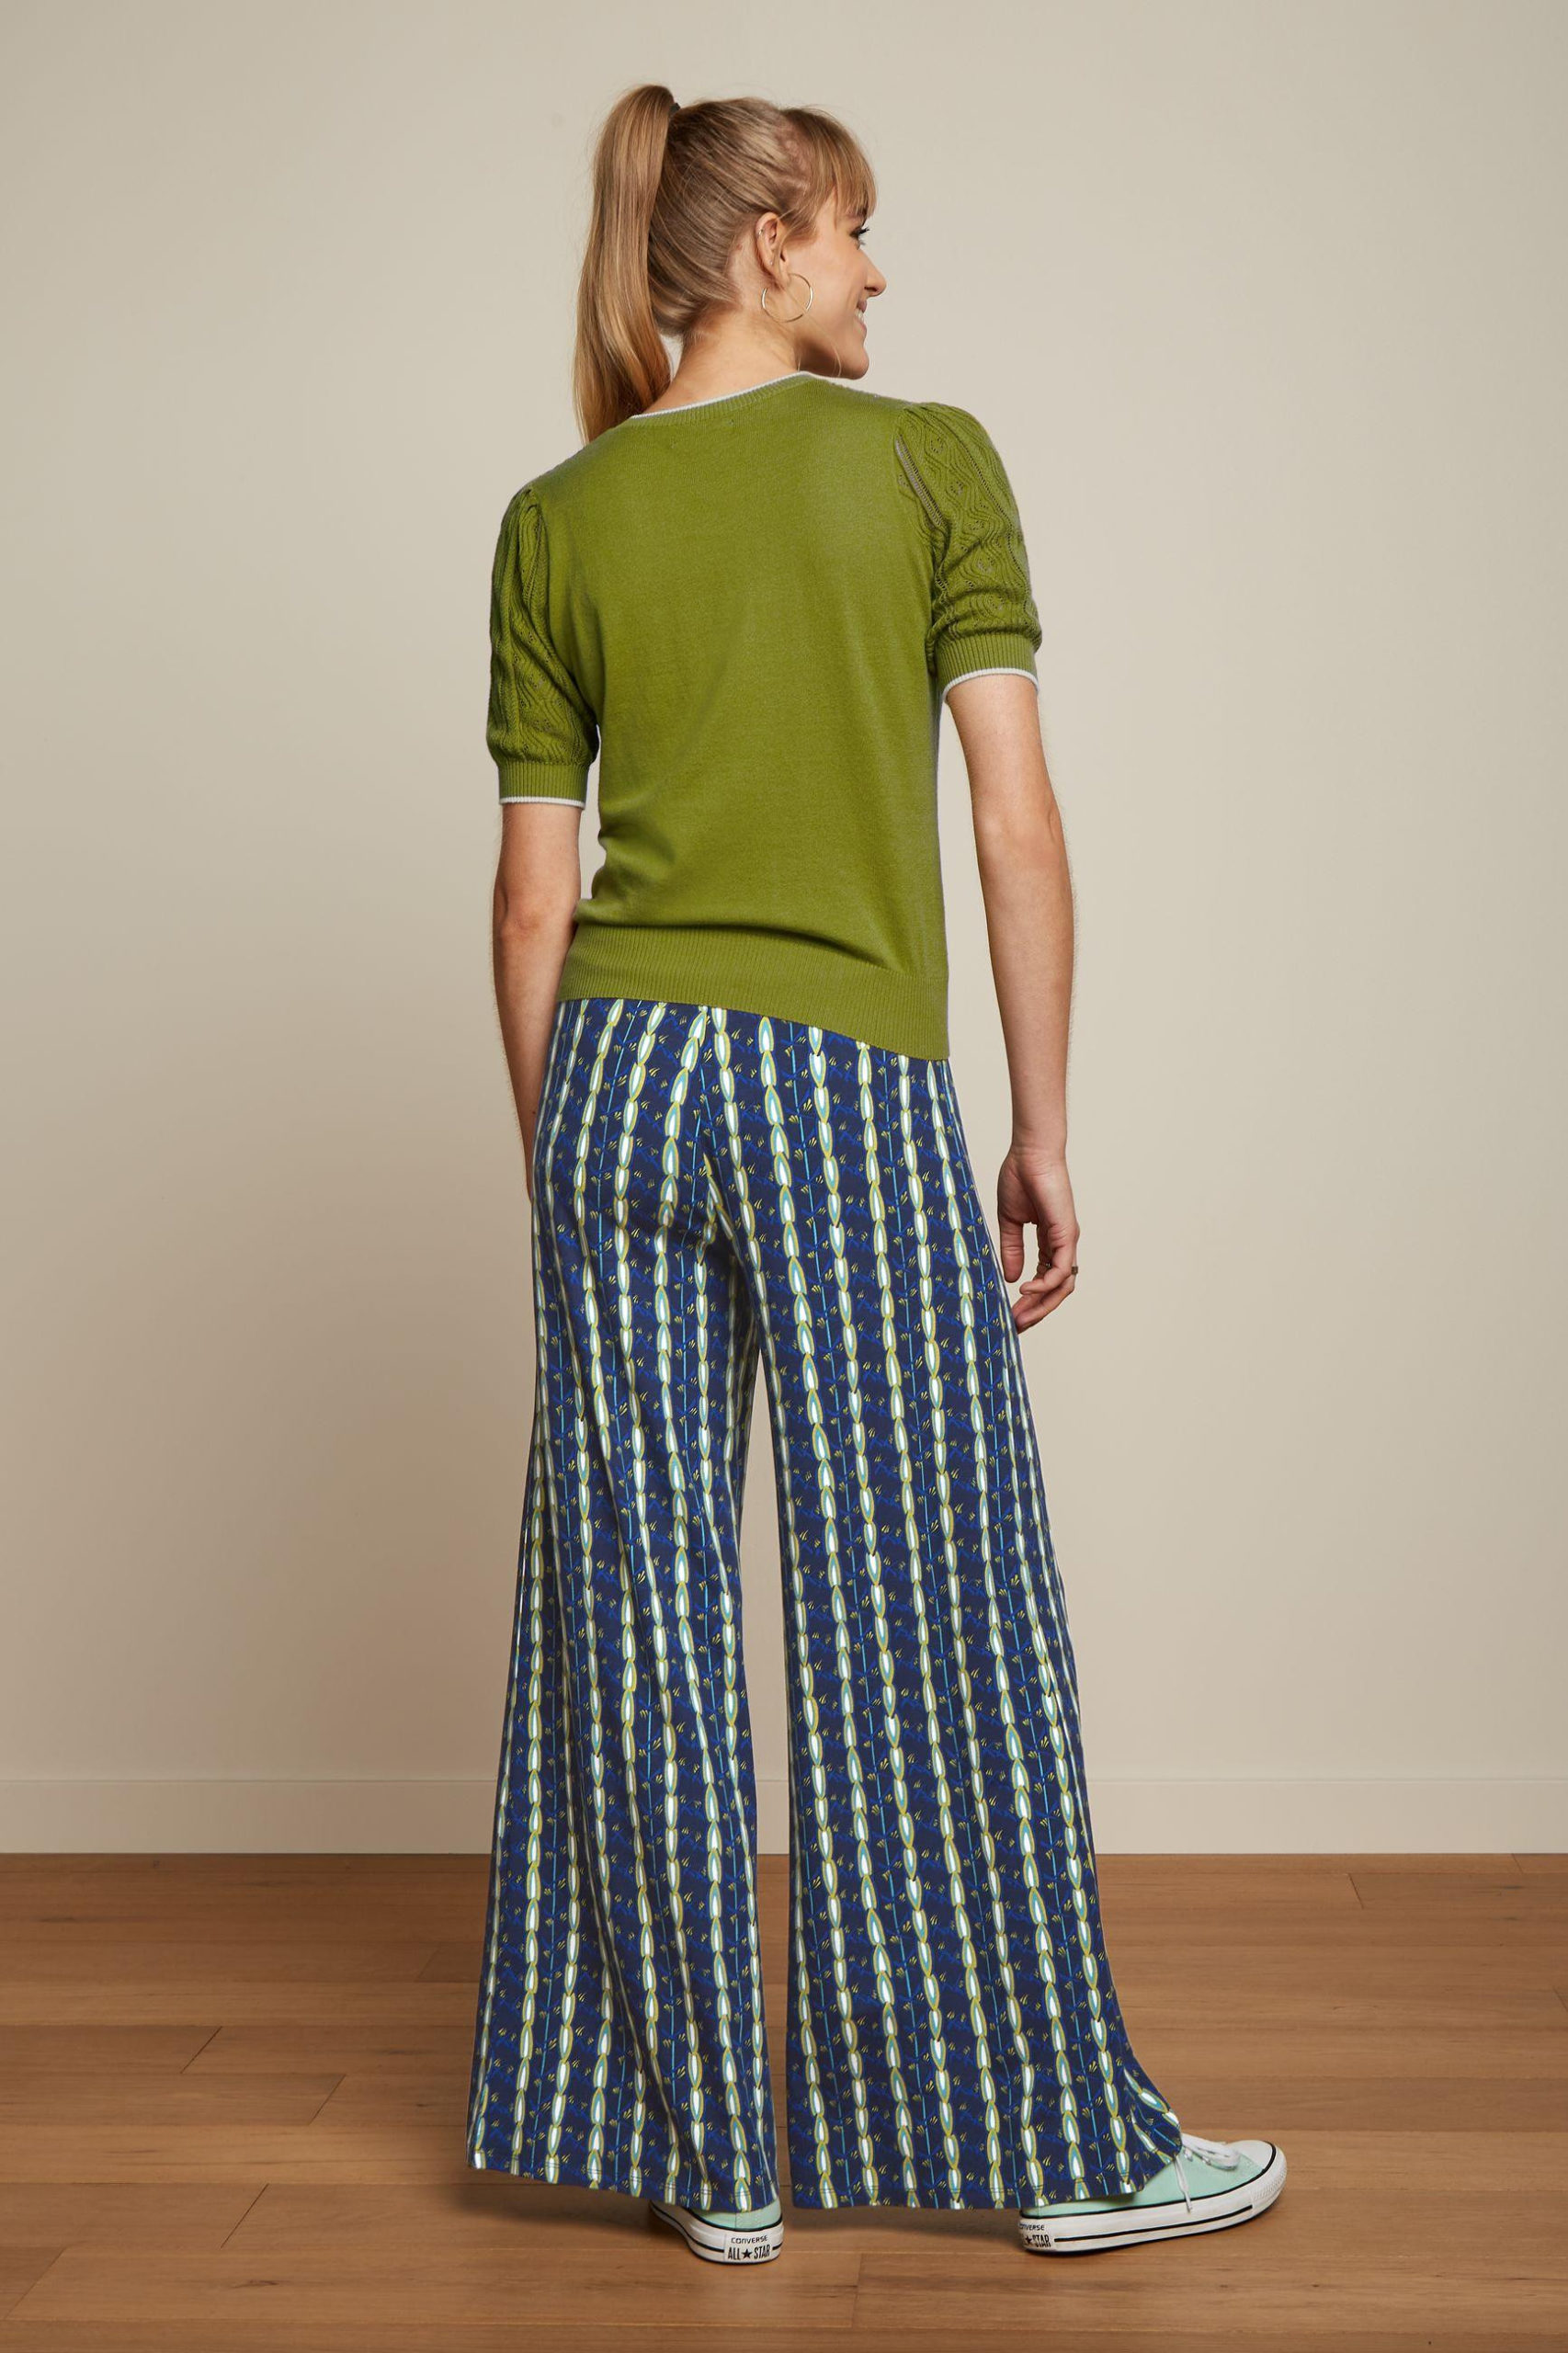 Agnes Puff Green Top Herrero with blue flare pants back